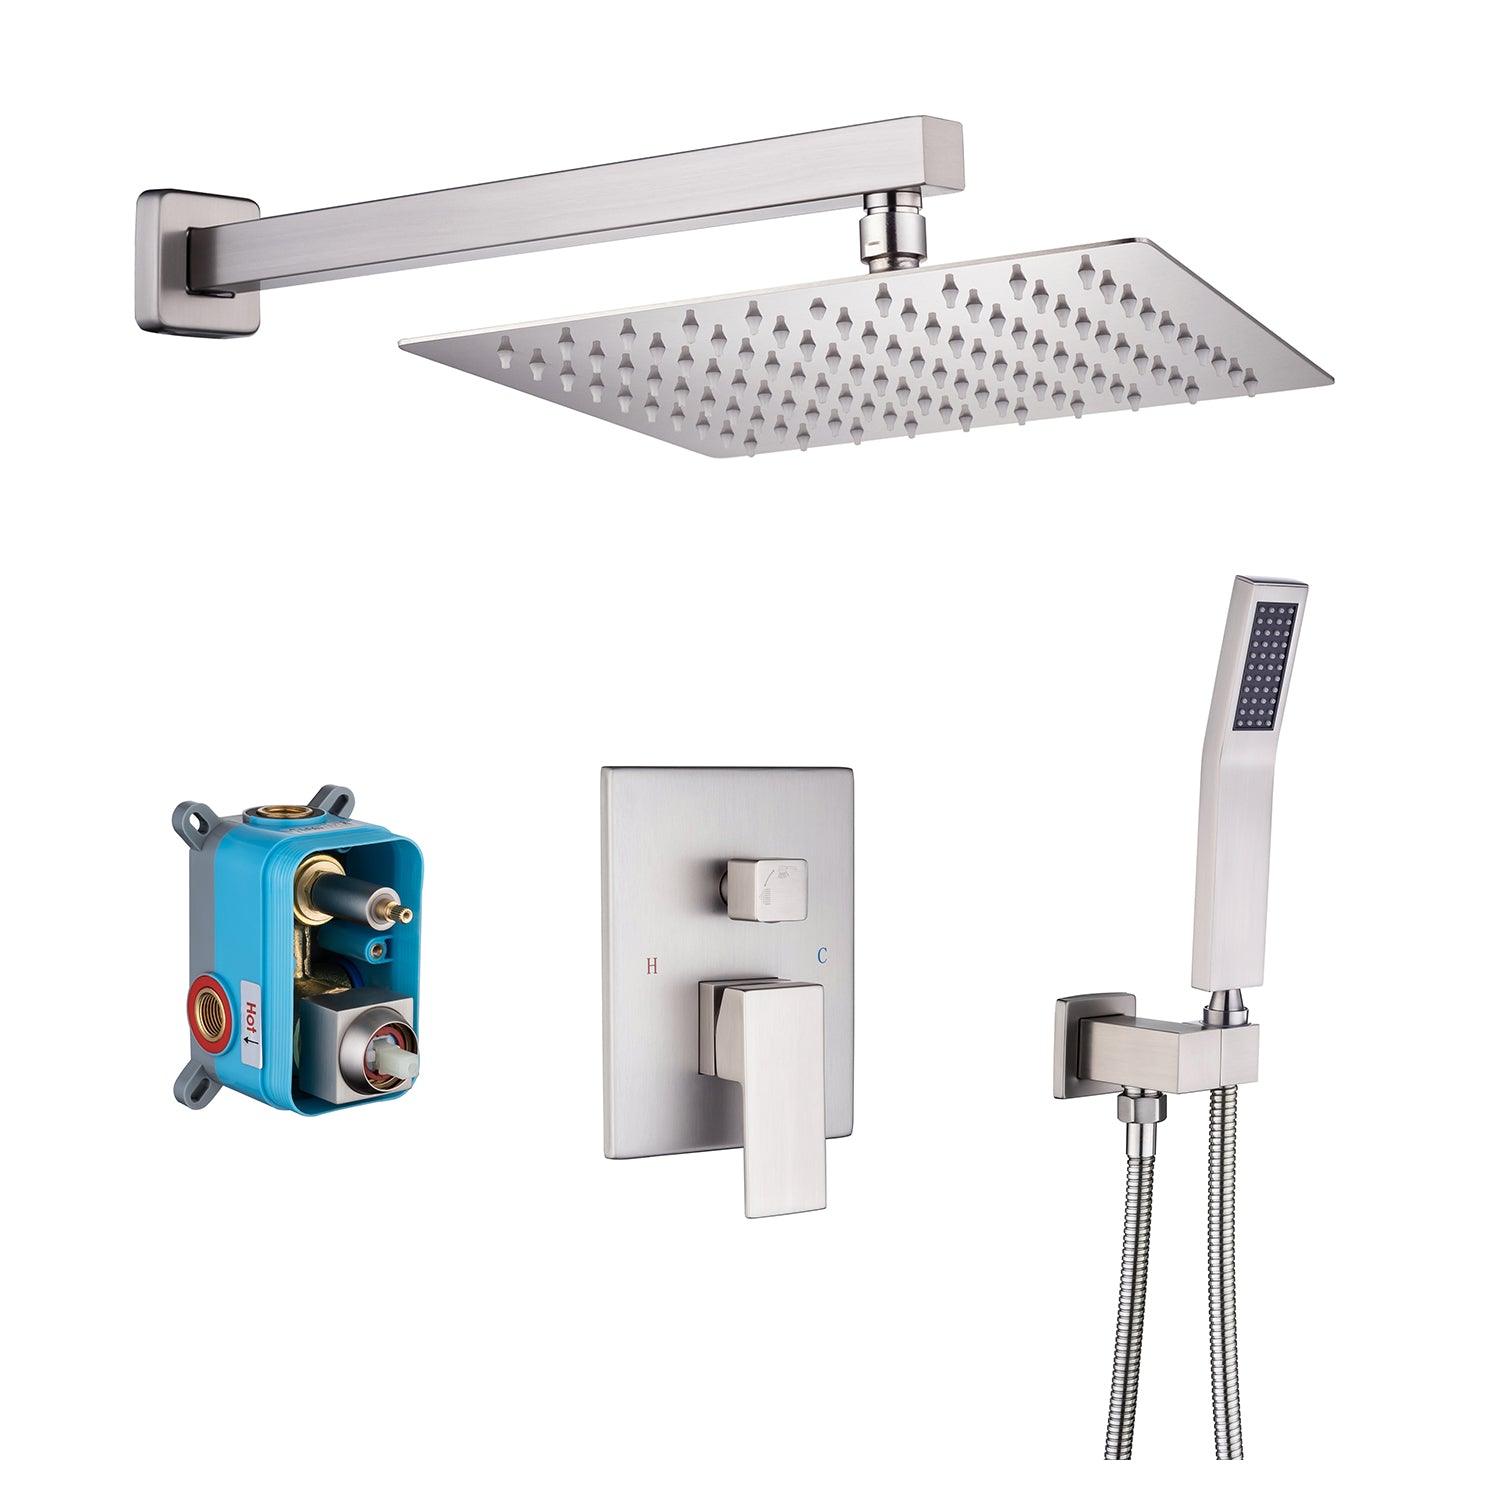 10" Shower Head 2-way Wall-Mount Square Shower Faucet with Rough-in Valve RX93102-10